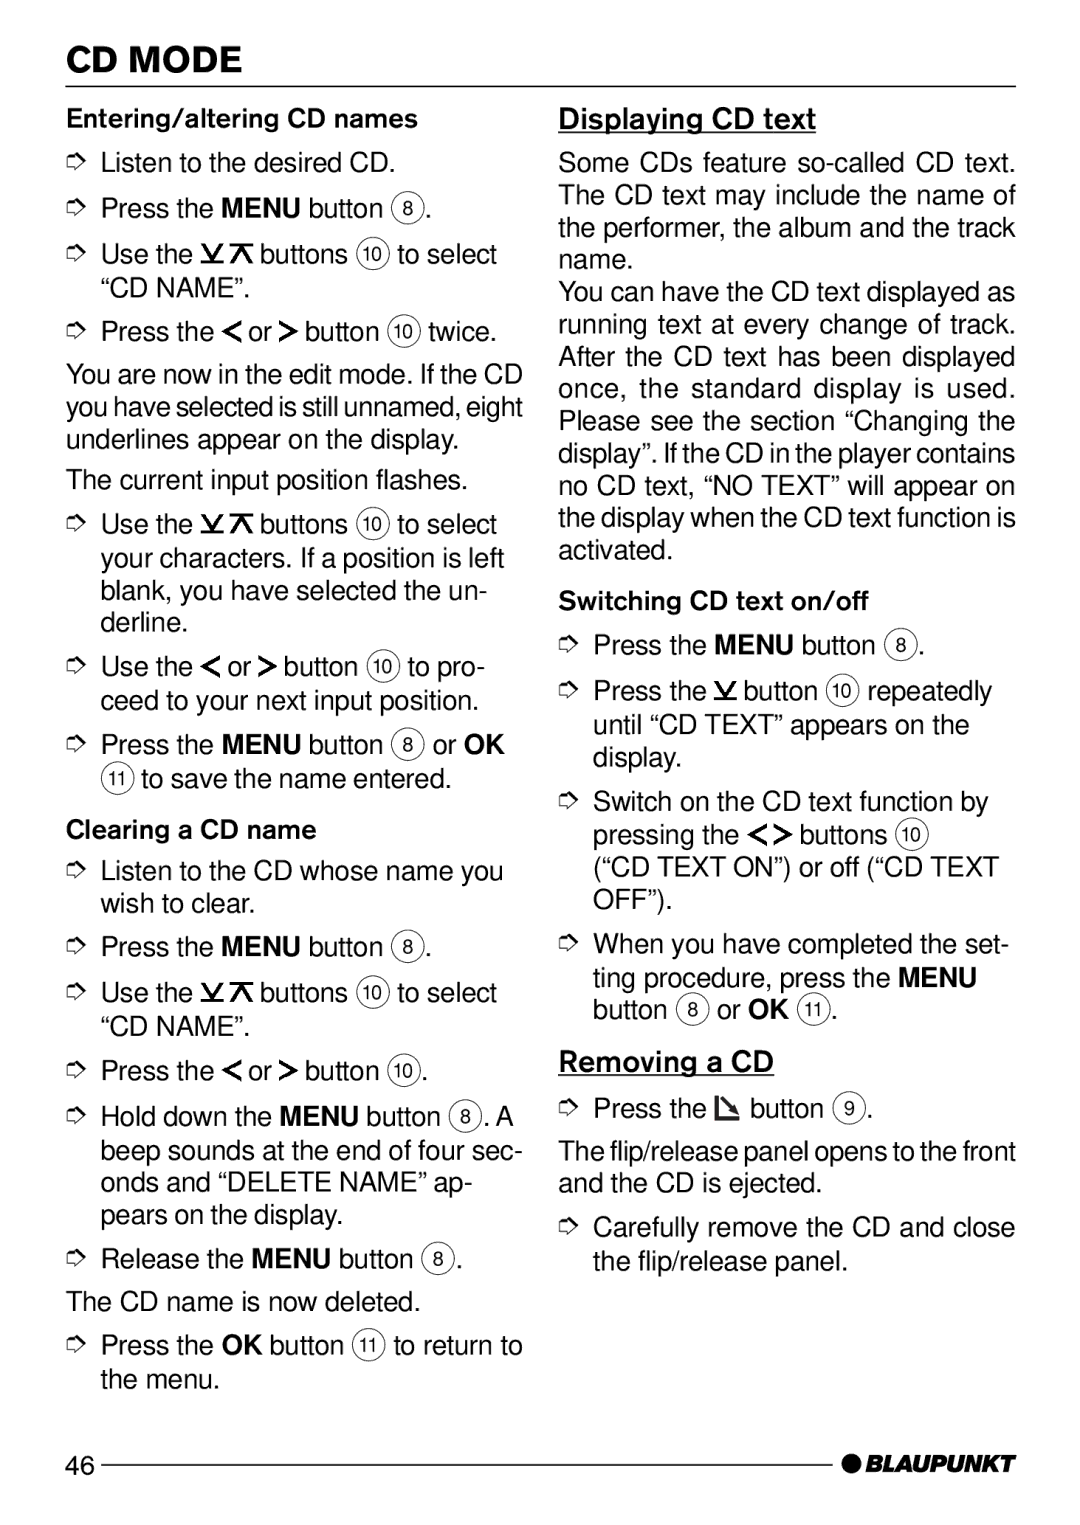 Blaupunkt CD52 operating instructions Displaying CD text, Removing a CD 